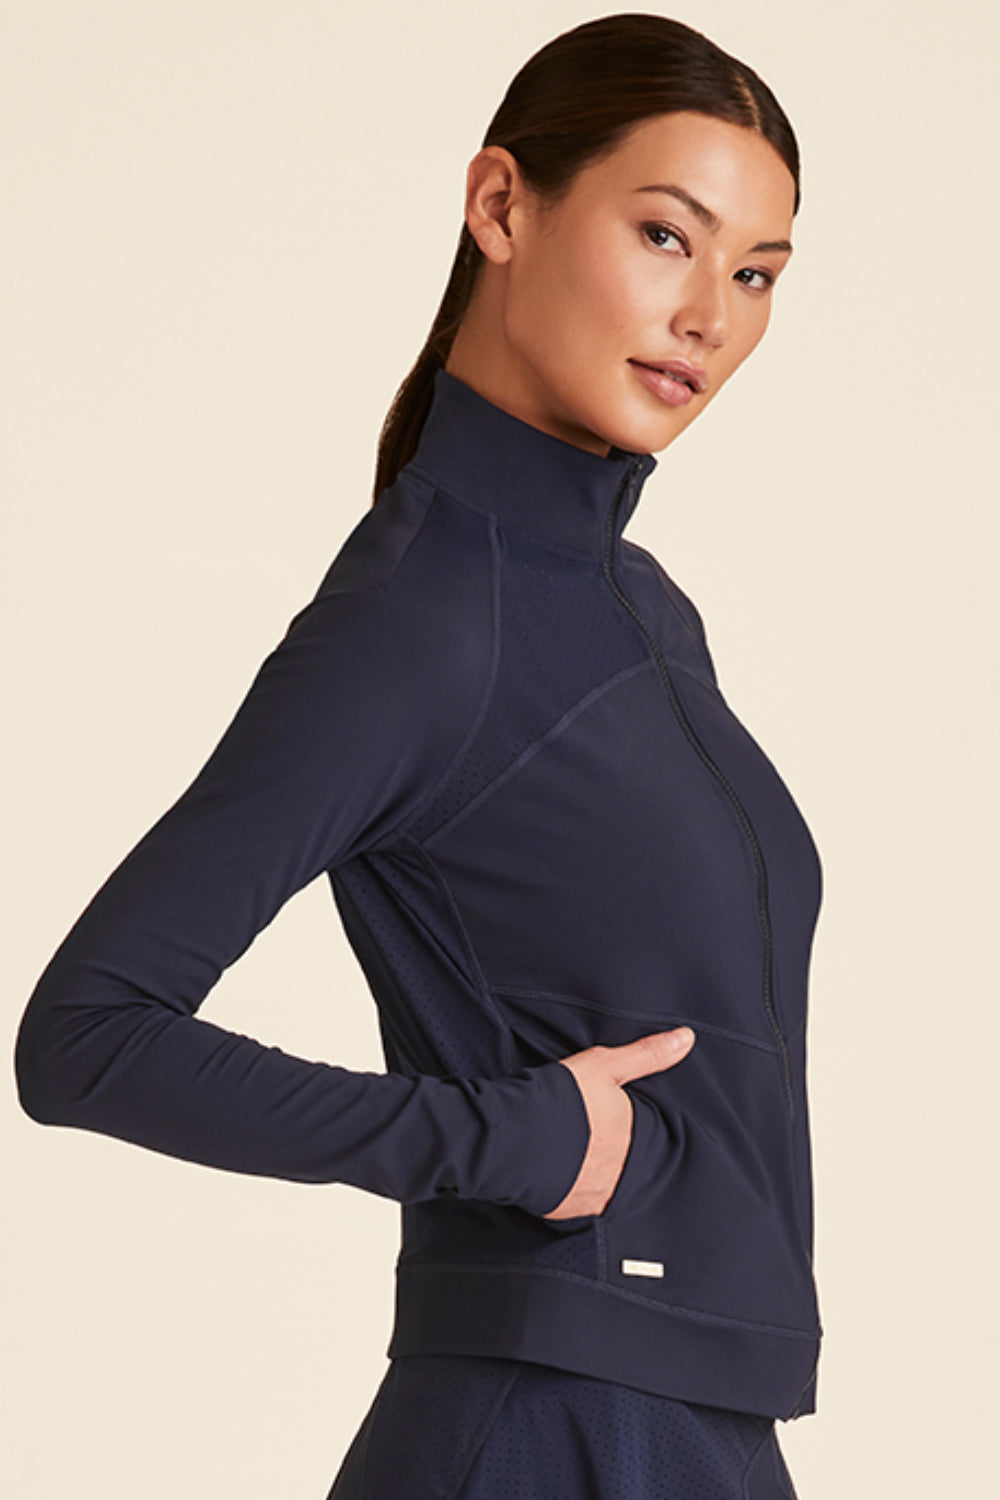 Navy tennis jacket for women from Alala activewear